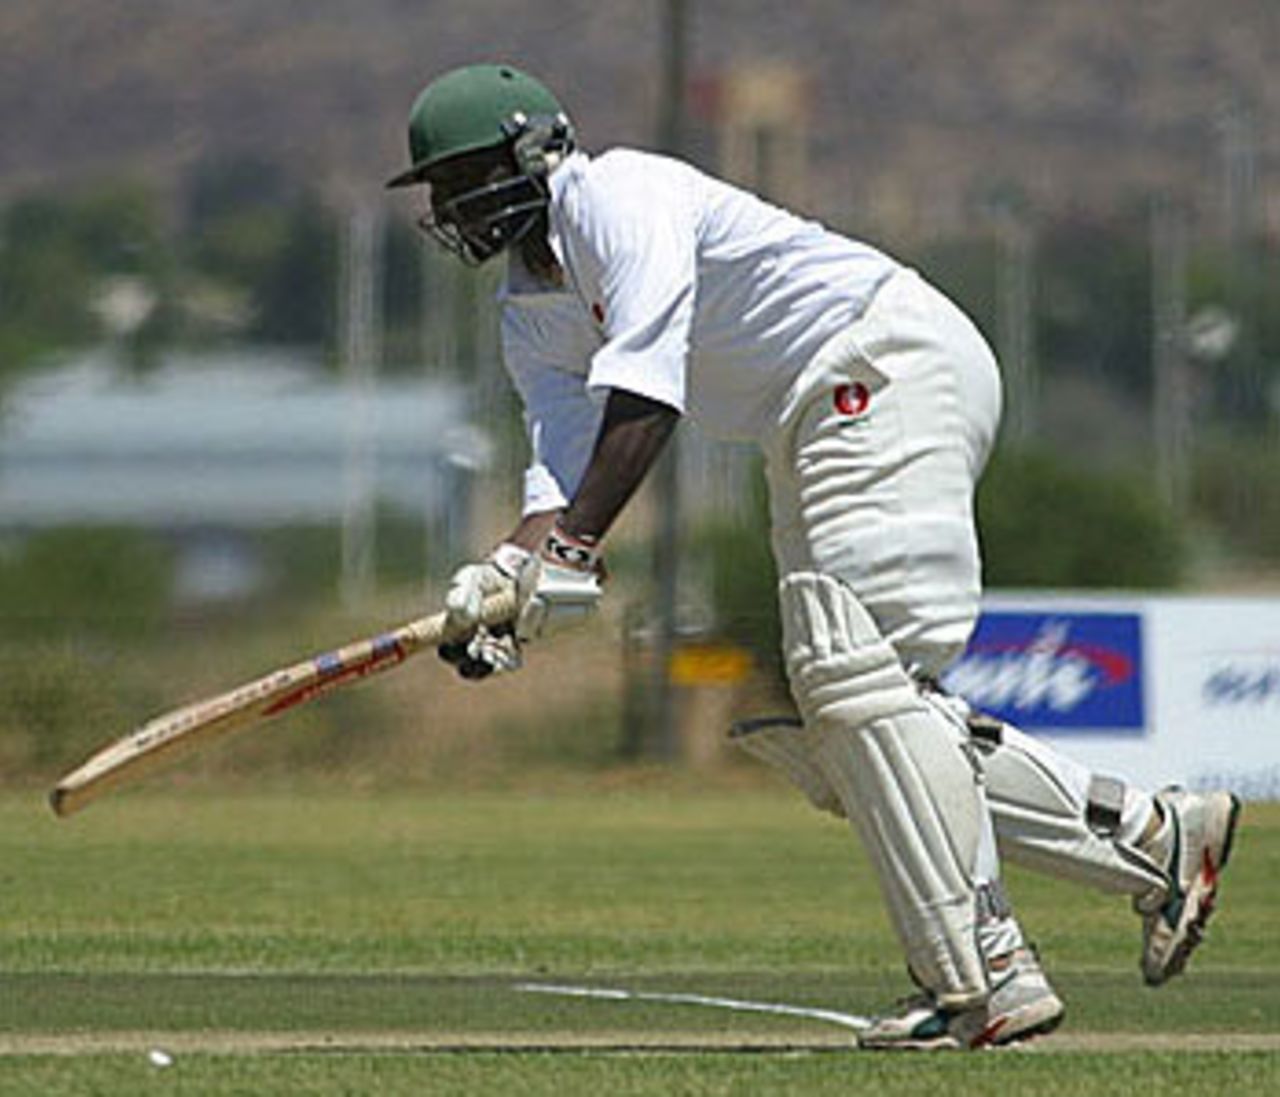 Steve Tikolo piles on the runs for Kenya against Bermuda in the Intercontinental Cup semi-final, October 23, 2005